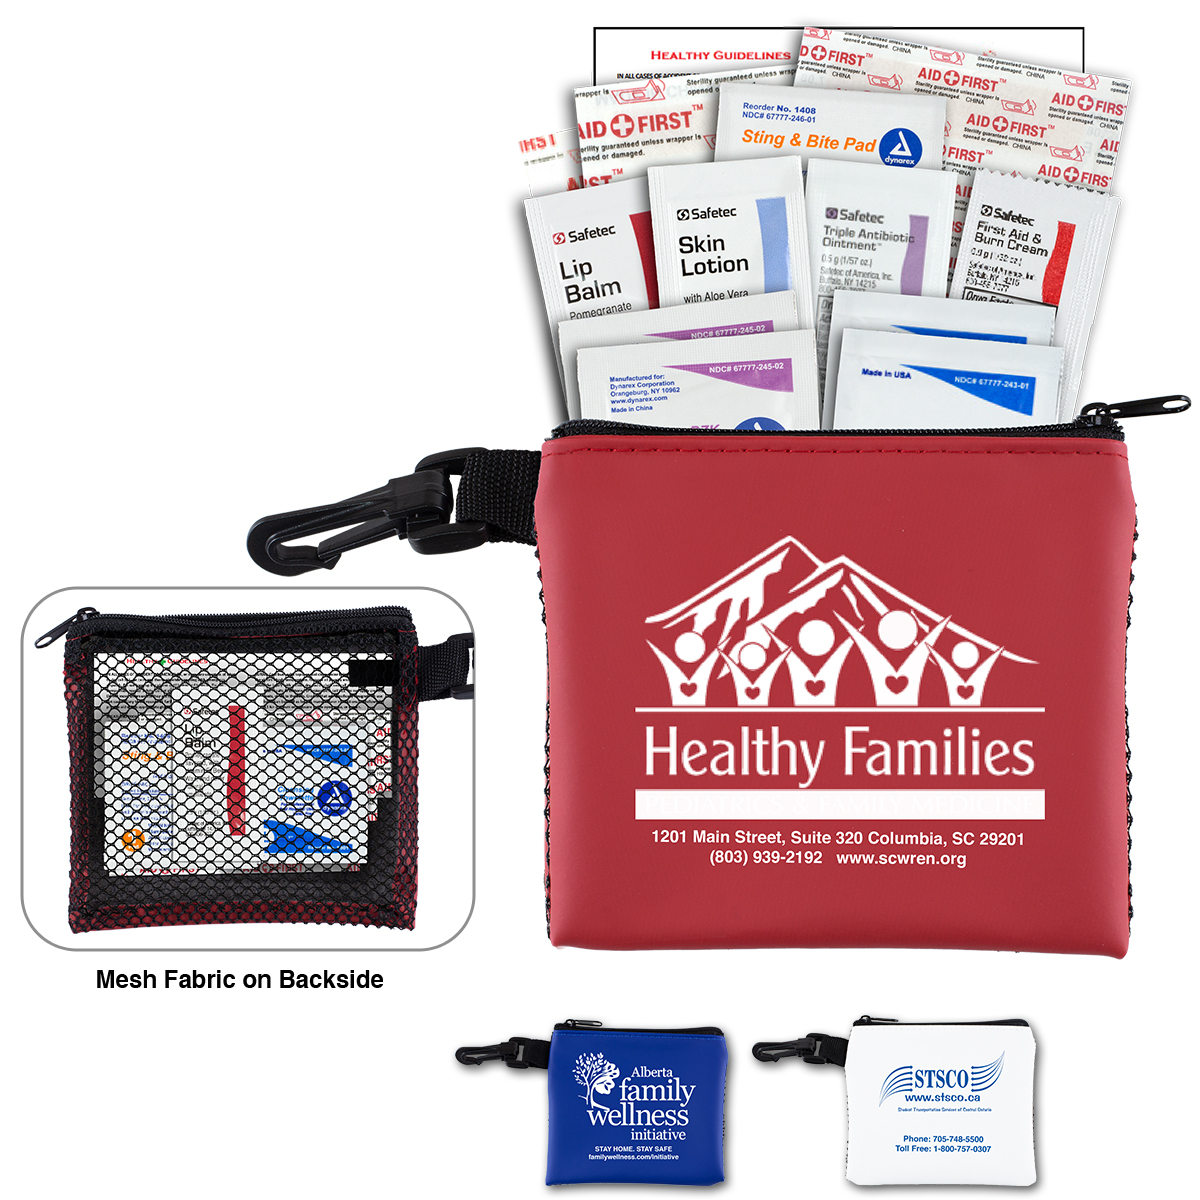 "TEAM MOM" 21 Piece All Purpose Healthy Living Pack in Zipper Mesh pack Components inserted into Zipper Kit